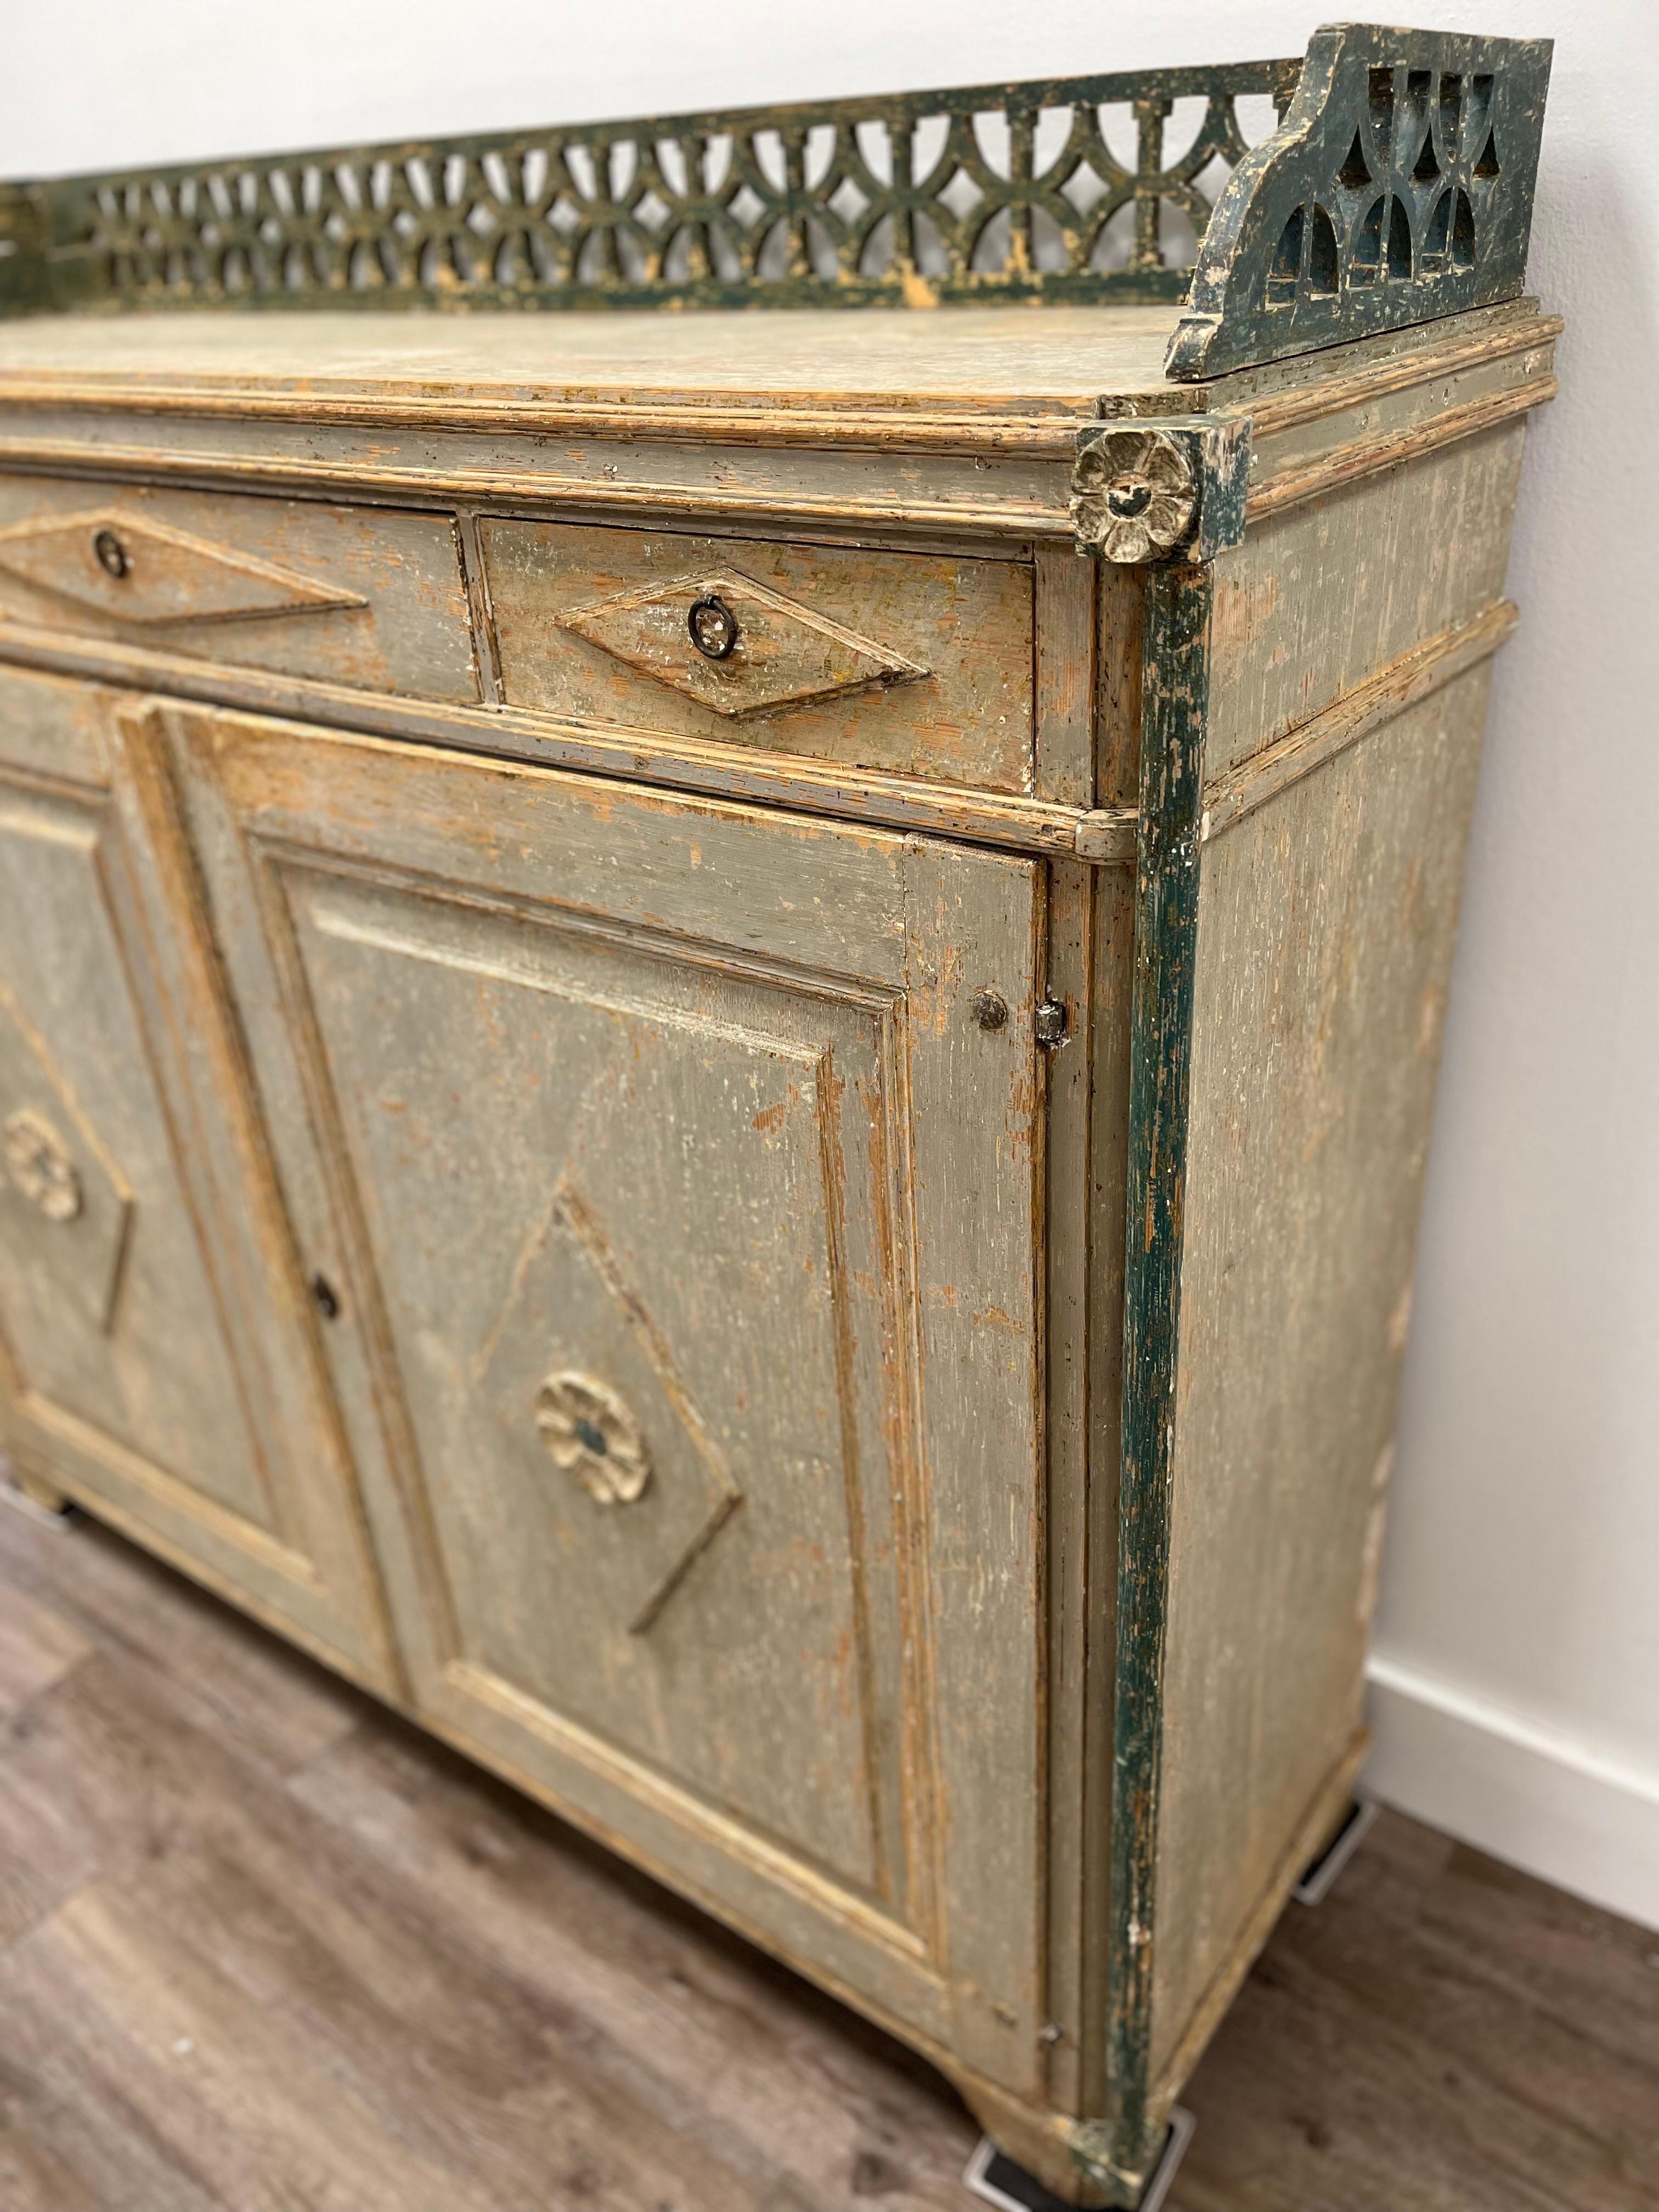 A Swedish Late Gustavian buffet from Medalpad. Detailed wood carvings – flower petal décor and pierced gallery top. Three drawers with horizontal diamond-shaped fronts and simple pulls on top. Below, recessed cabinet door fronts with vertical